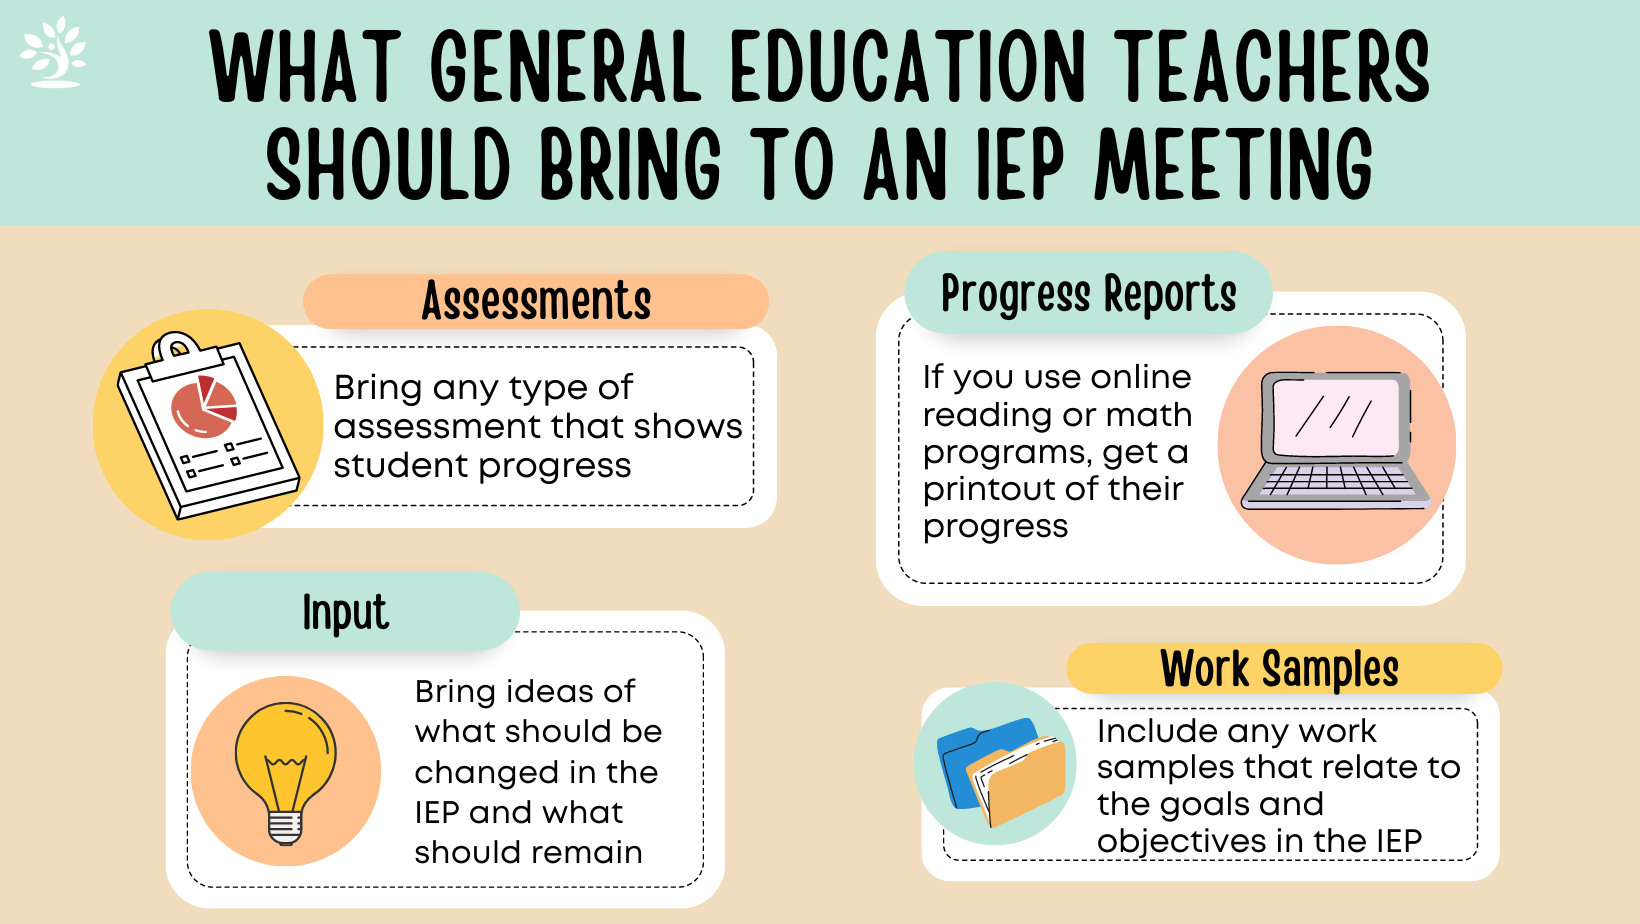 What general education teachers should bring to an IEP meeting. Assessments: Bring any type of assessment that shows student progress. 

Progress reports: If you use online reading or math programs, get a printout of their progress

Input: Bring ideas of what should be changed in the IEP and what should remain

Work samples: Include any work samples that relate to the goals and objectives in the IEP